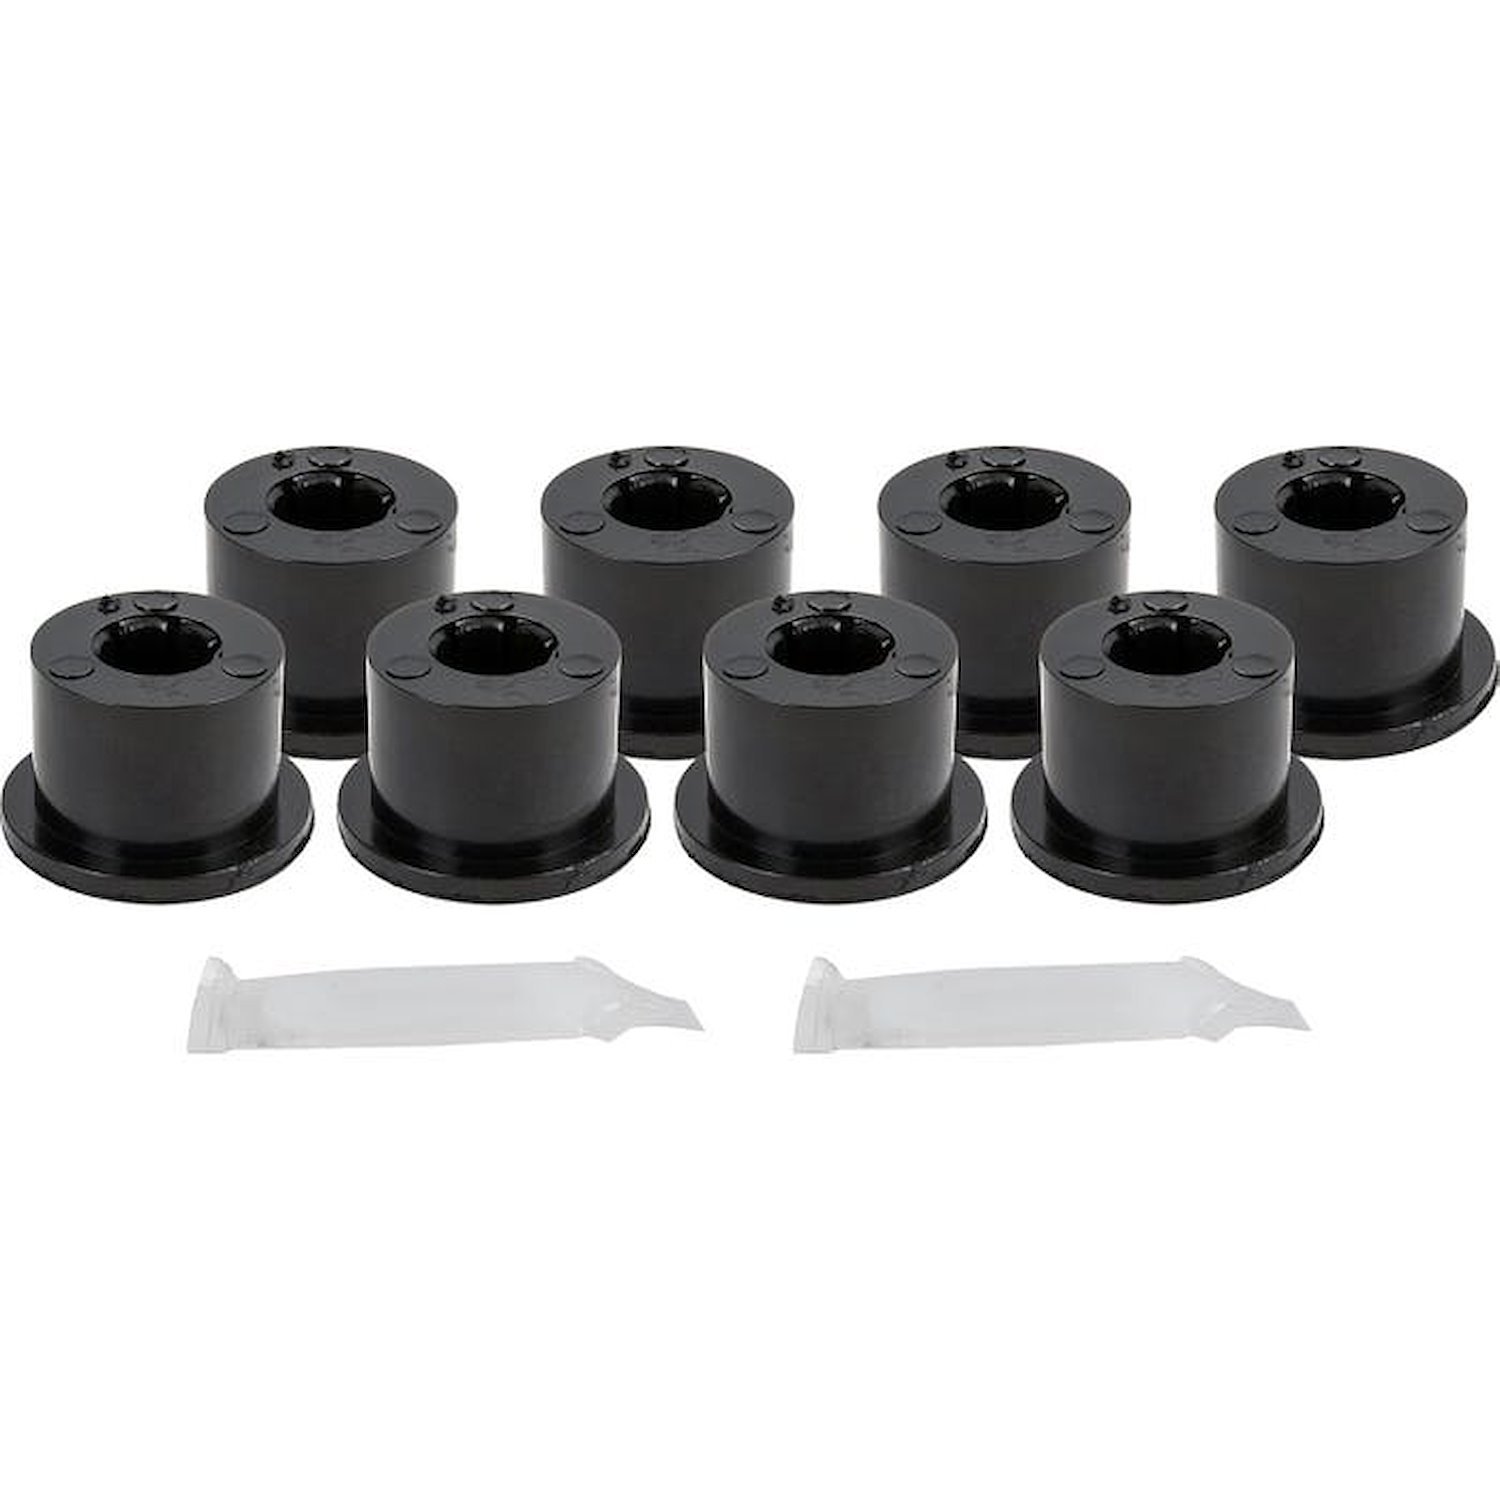 TGI-310935 Leaf Springs Replacement Bushing Kit, All-Pro & Trail-Gear Rear For 79-95 Toyota Pickup, 85-95 4 Runner